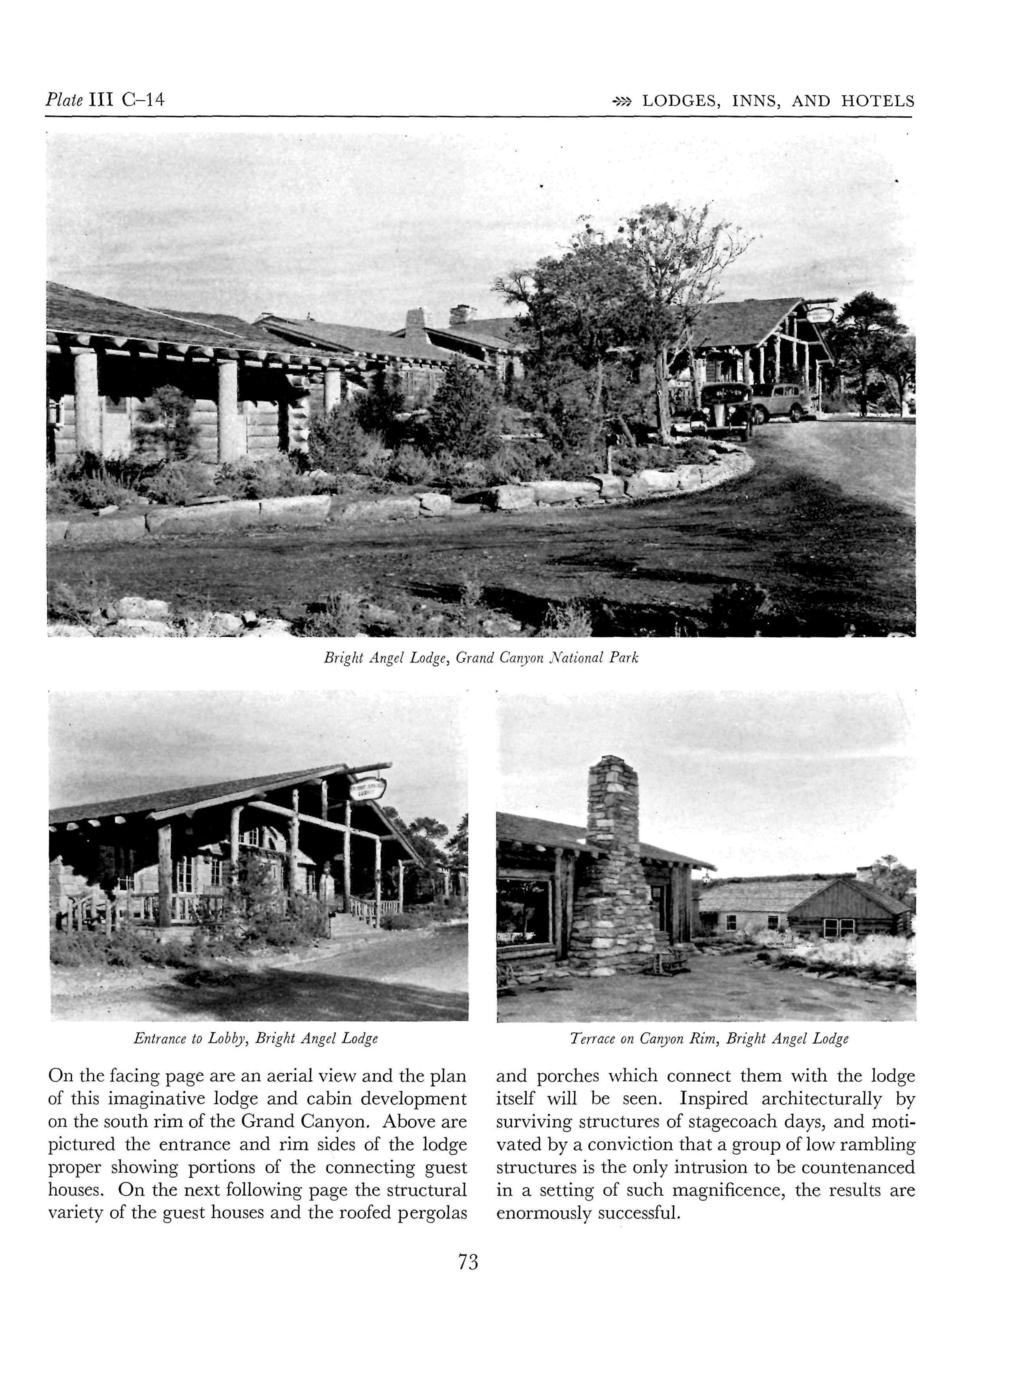 Plate 111 C-14 ->» LODGES, INNS, AND HOTELS Bright Angel Lodge, Grand Canyon National Park Entrance to Lobby, Bright Angel Lodge On the facing page are an aerial view and the plan of this imaginative